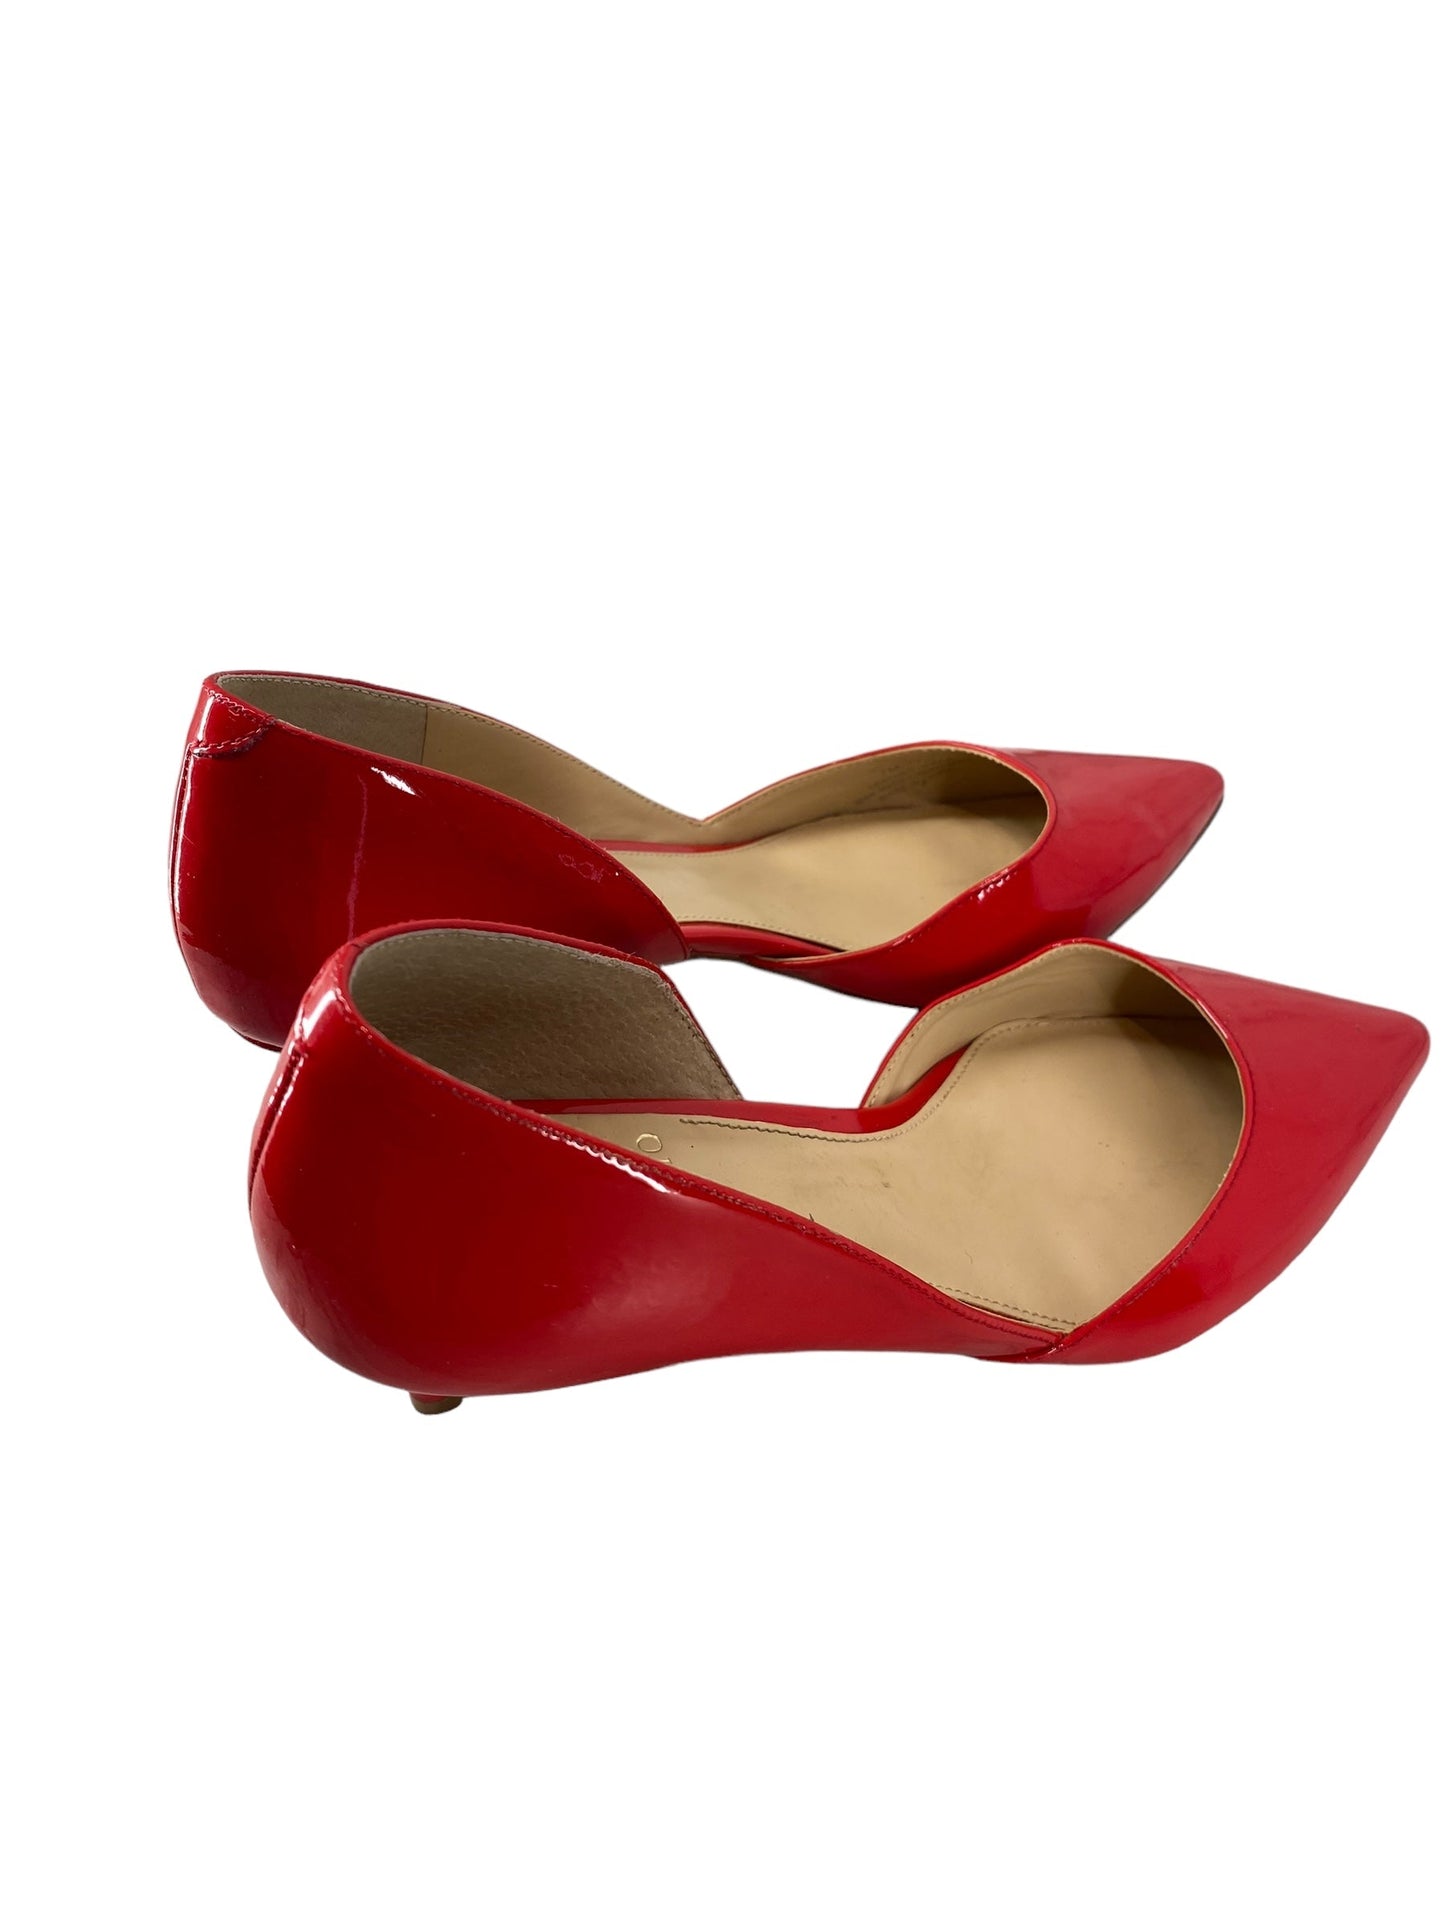 Red Shoes Heels Kitten Vince Camuto, Size 7